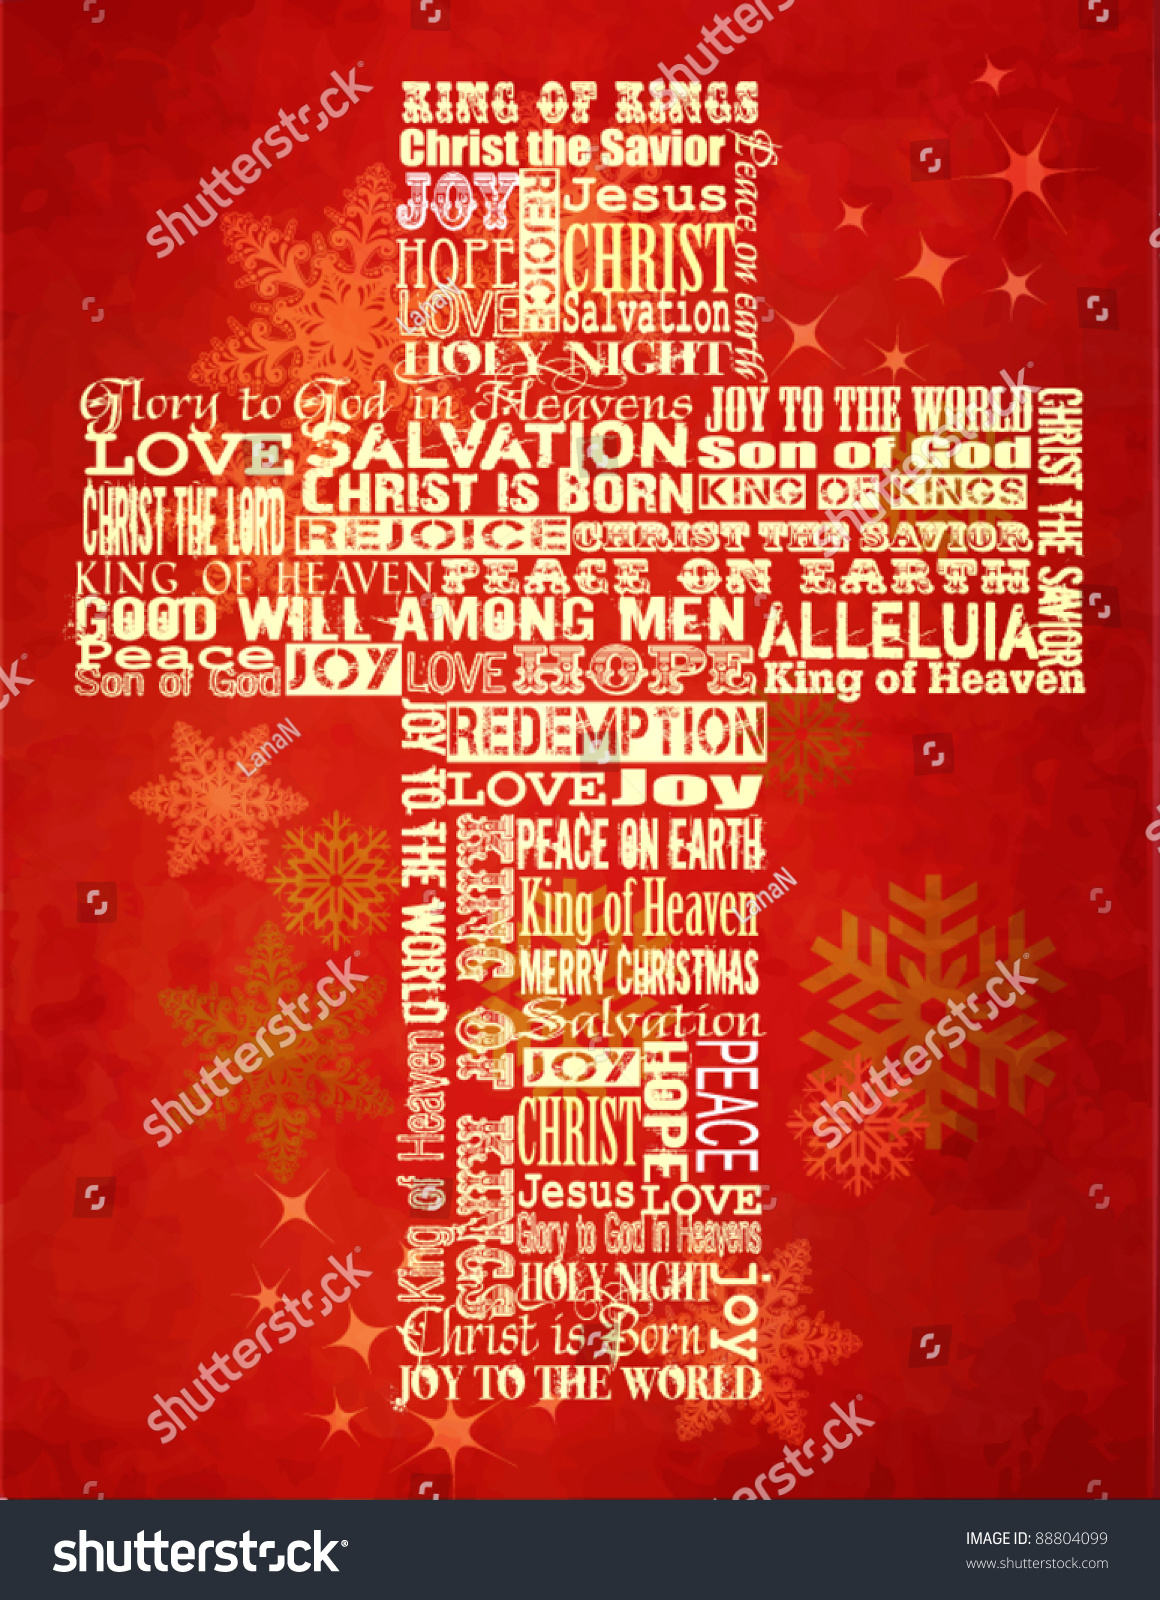 Christmas Cross bright Christmas background with Christmas greetings in the shape of the Cross